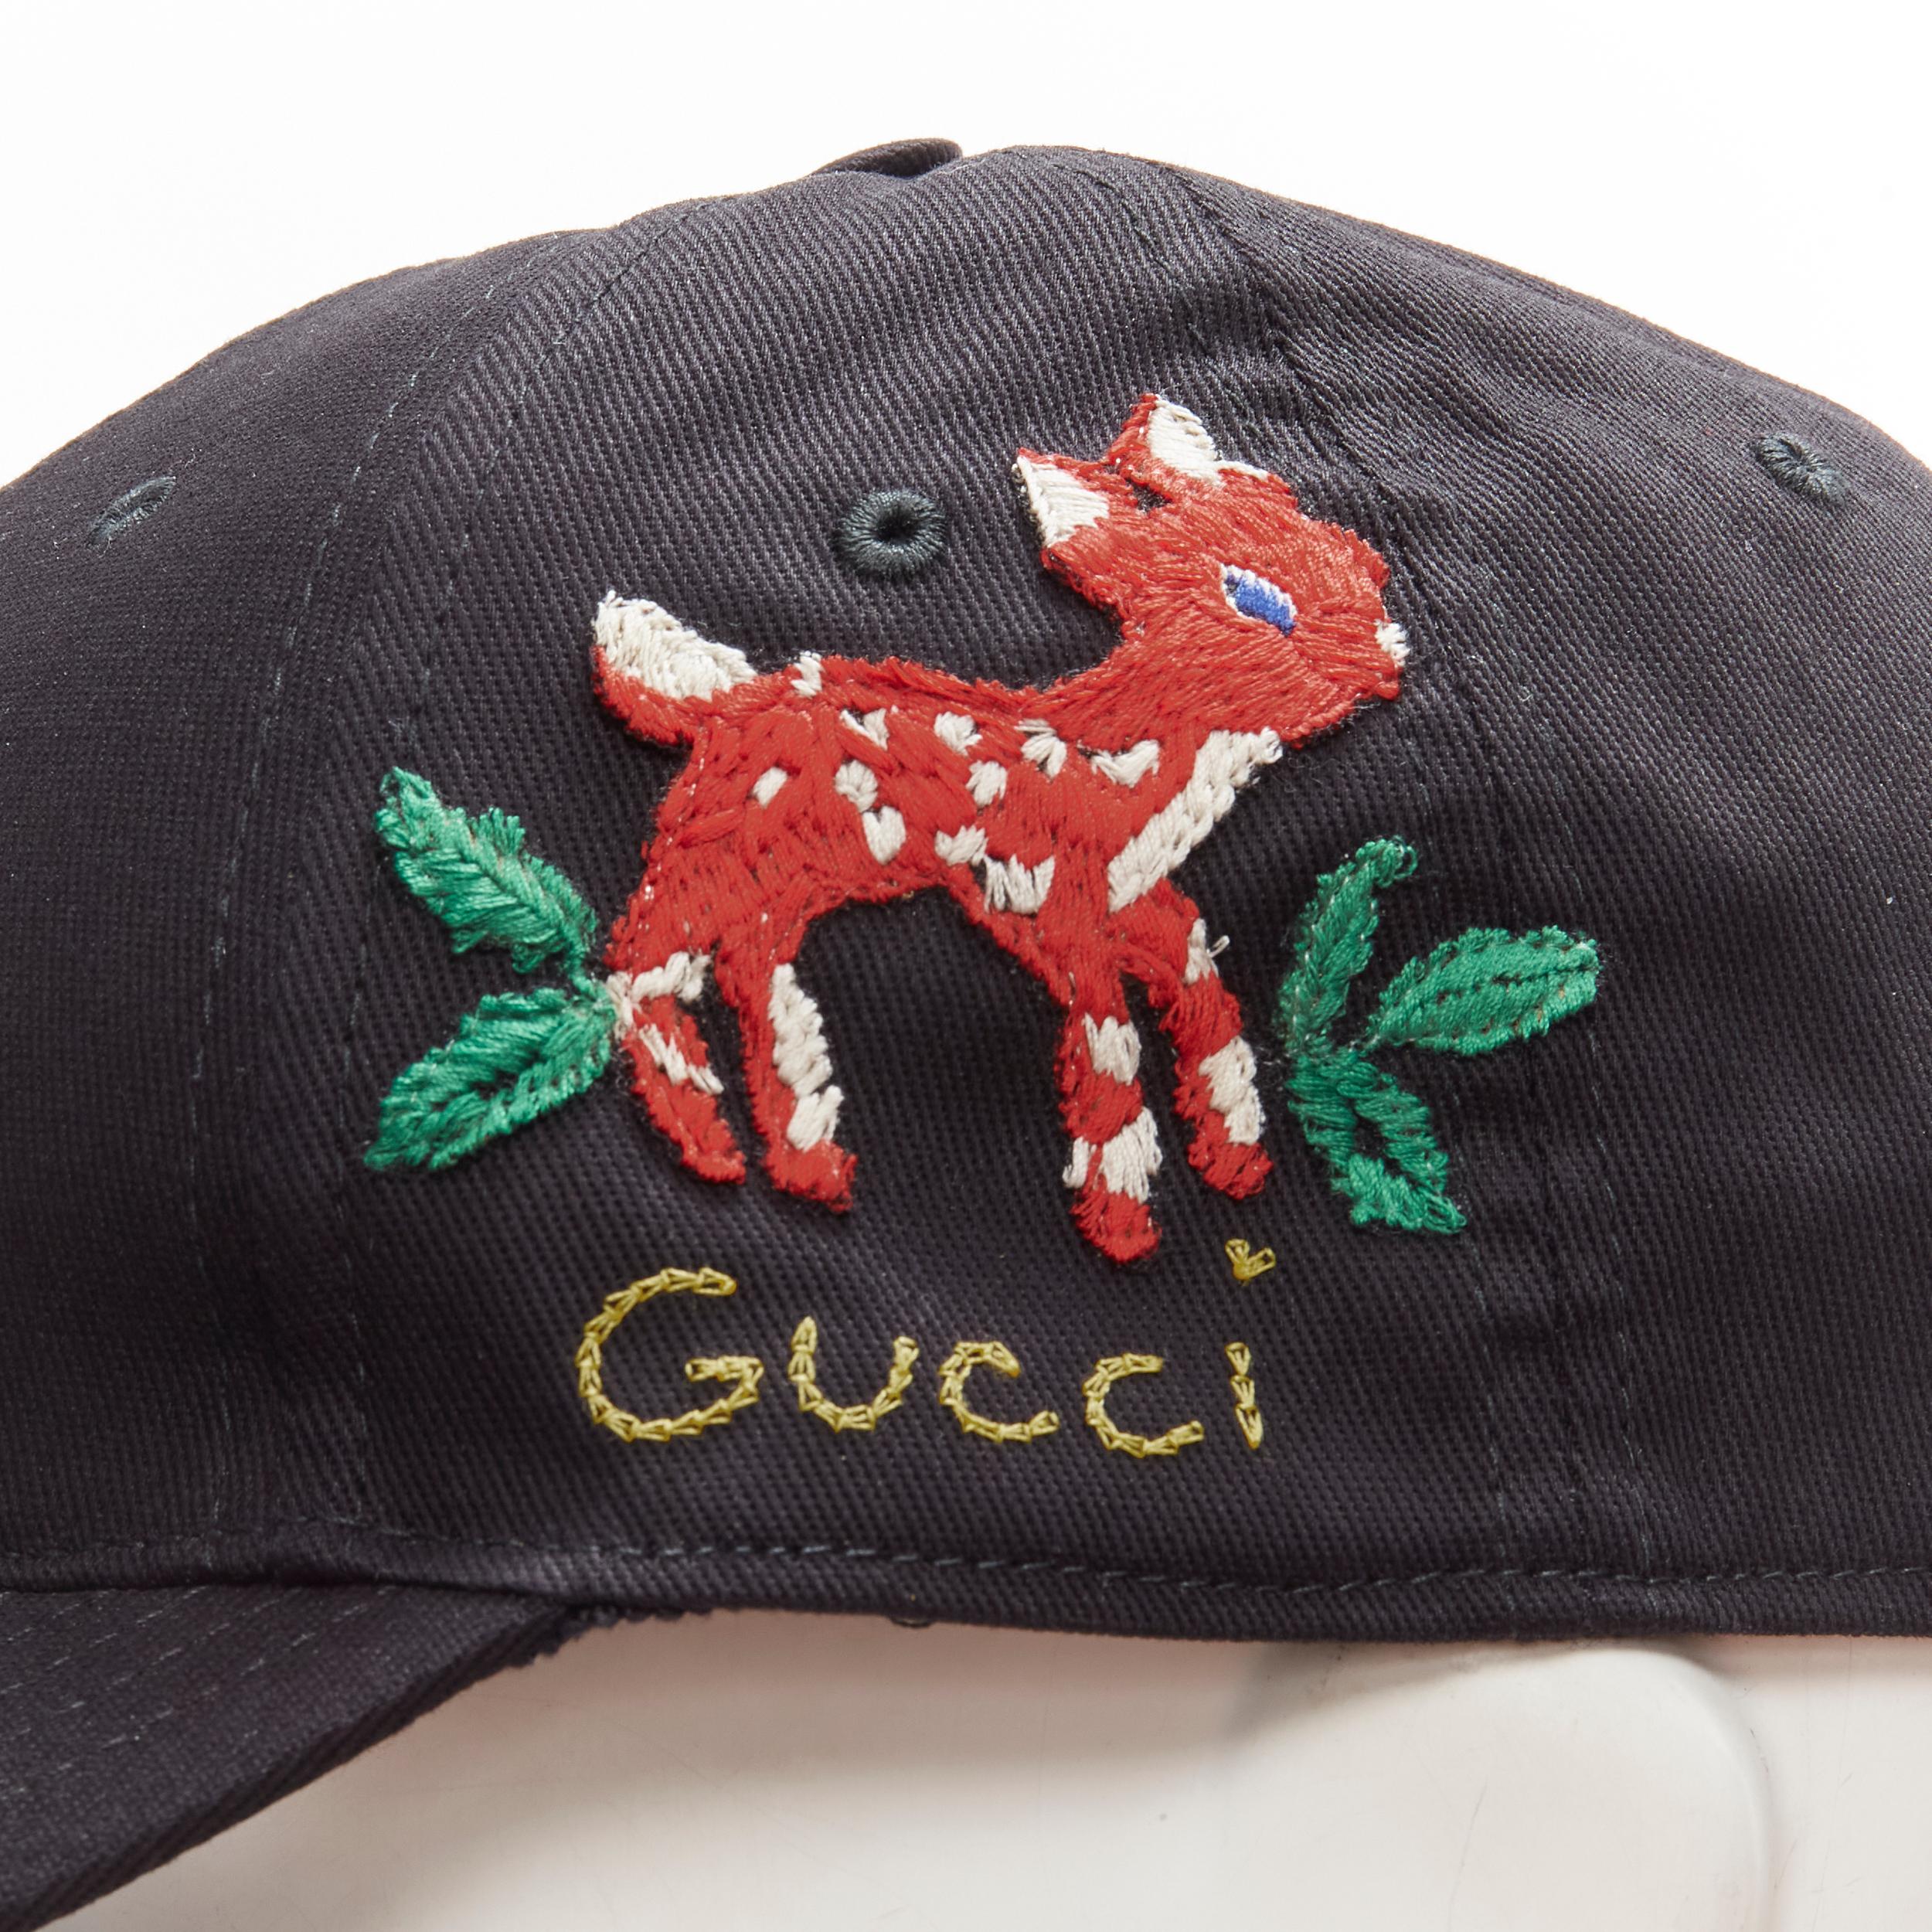 GUCCI NY YANKEES 2018 black Bambi embroidery cap hat 55-59cm 
Reference: LNKO/A01984 
Brand: Gucci 
Designer: NY Yankee 
Material: Cotton 
Color: Black 
Pattern: Solid 
Extra Detail: Bambi embroidery on side of cap. Silver-tone adjustable hardware